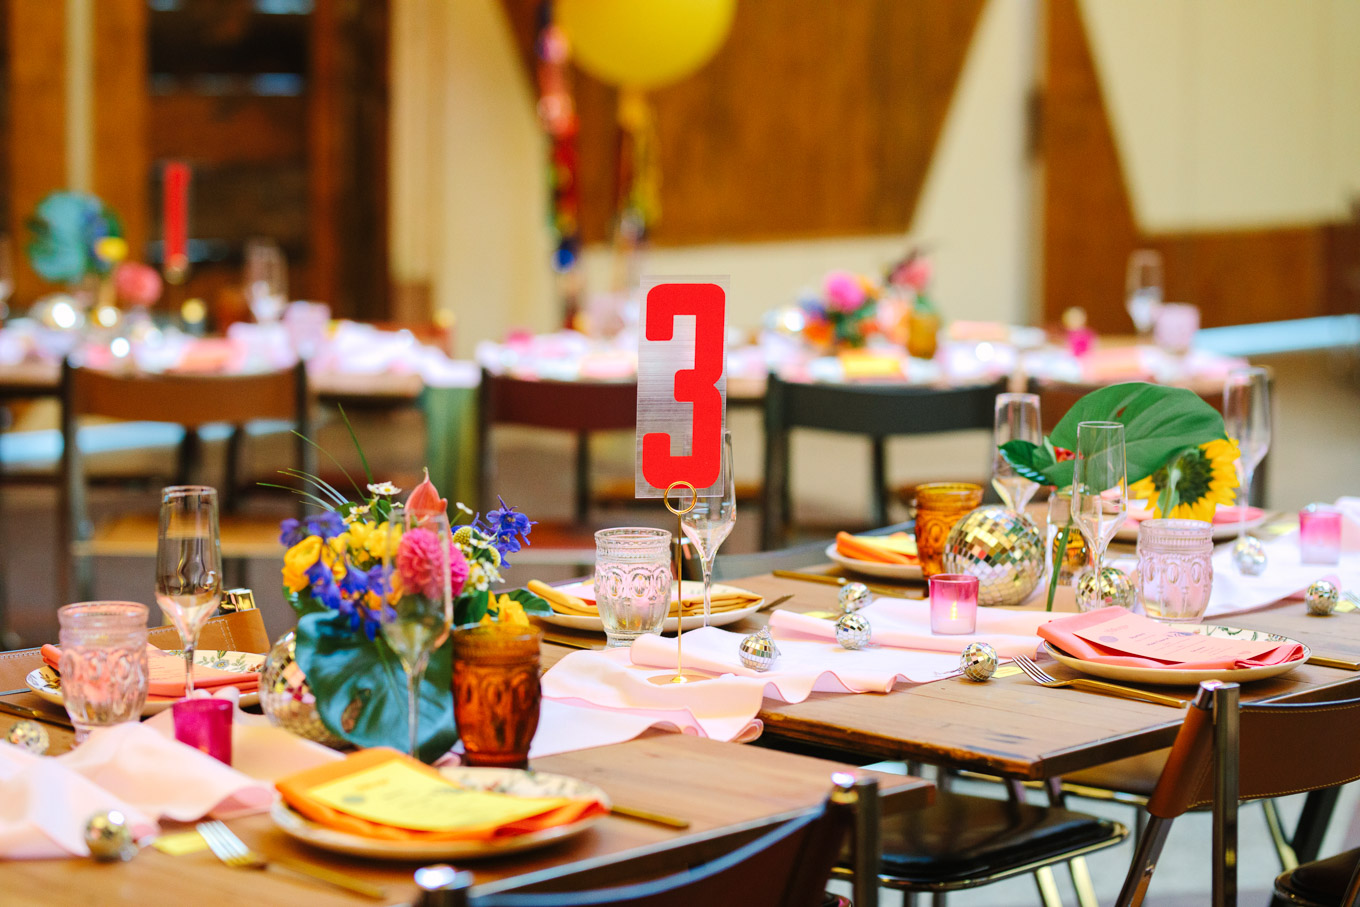 Bright graphic table number | Colorful Downtown Los Angeles Valentine Wedding | Los Angeles wedding photographer | #losangeleswedding #colorfulwedding #DTLA #valentinedtla   Source: Mary Costa Photography | Los Angeles